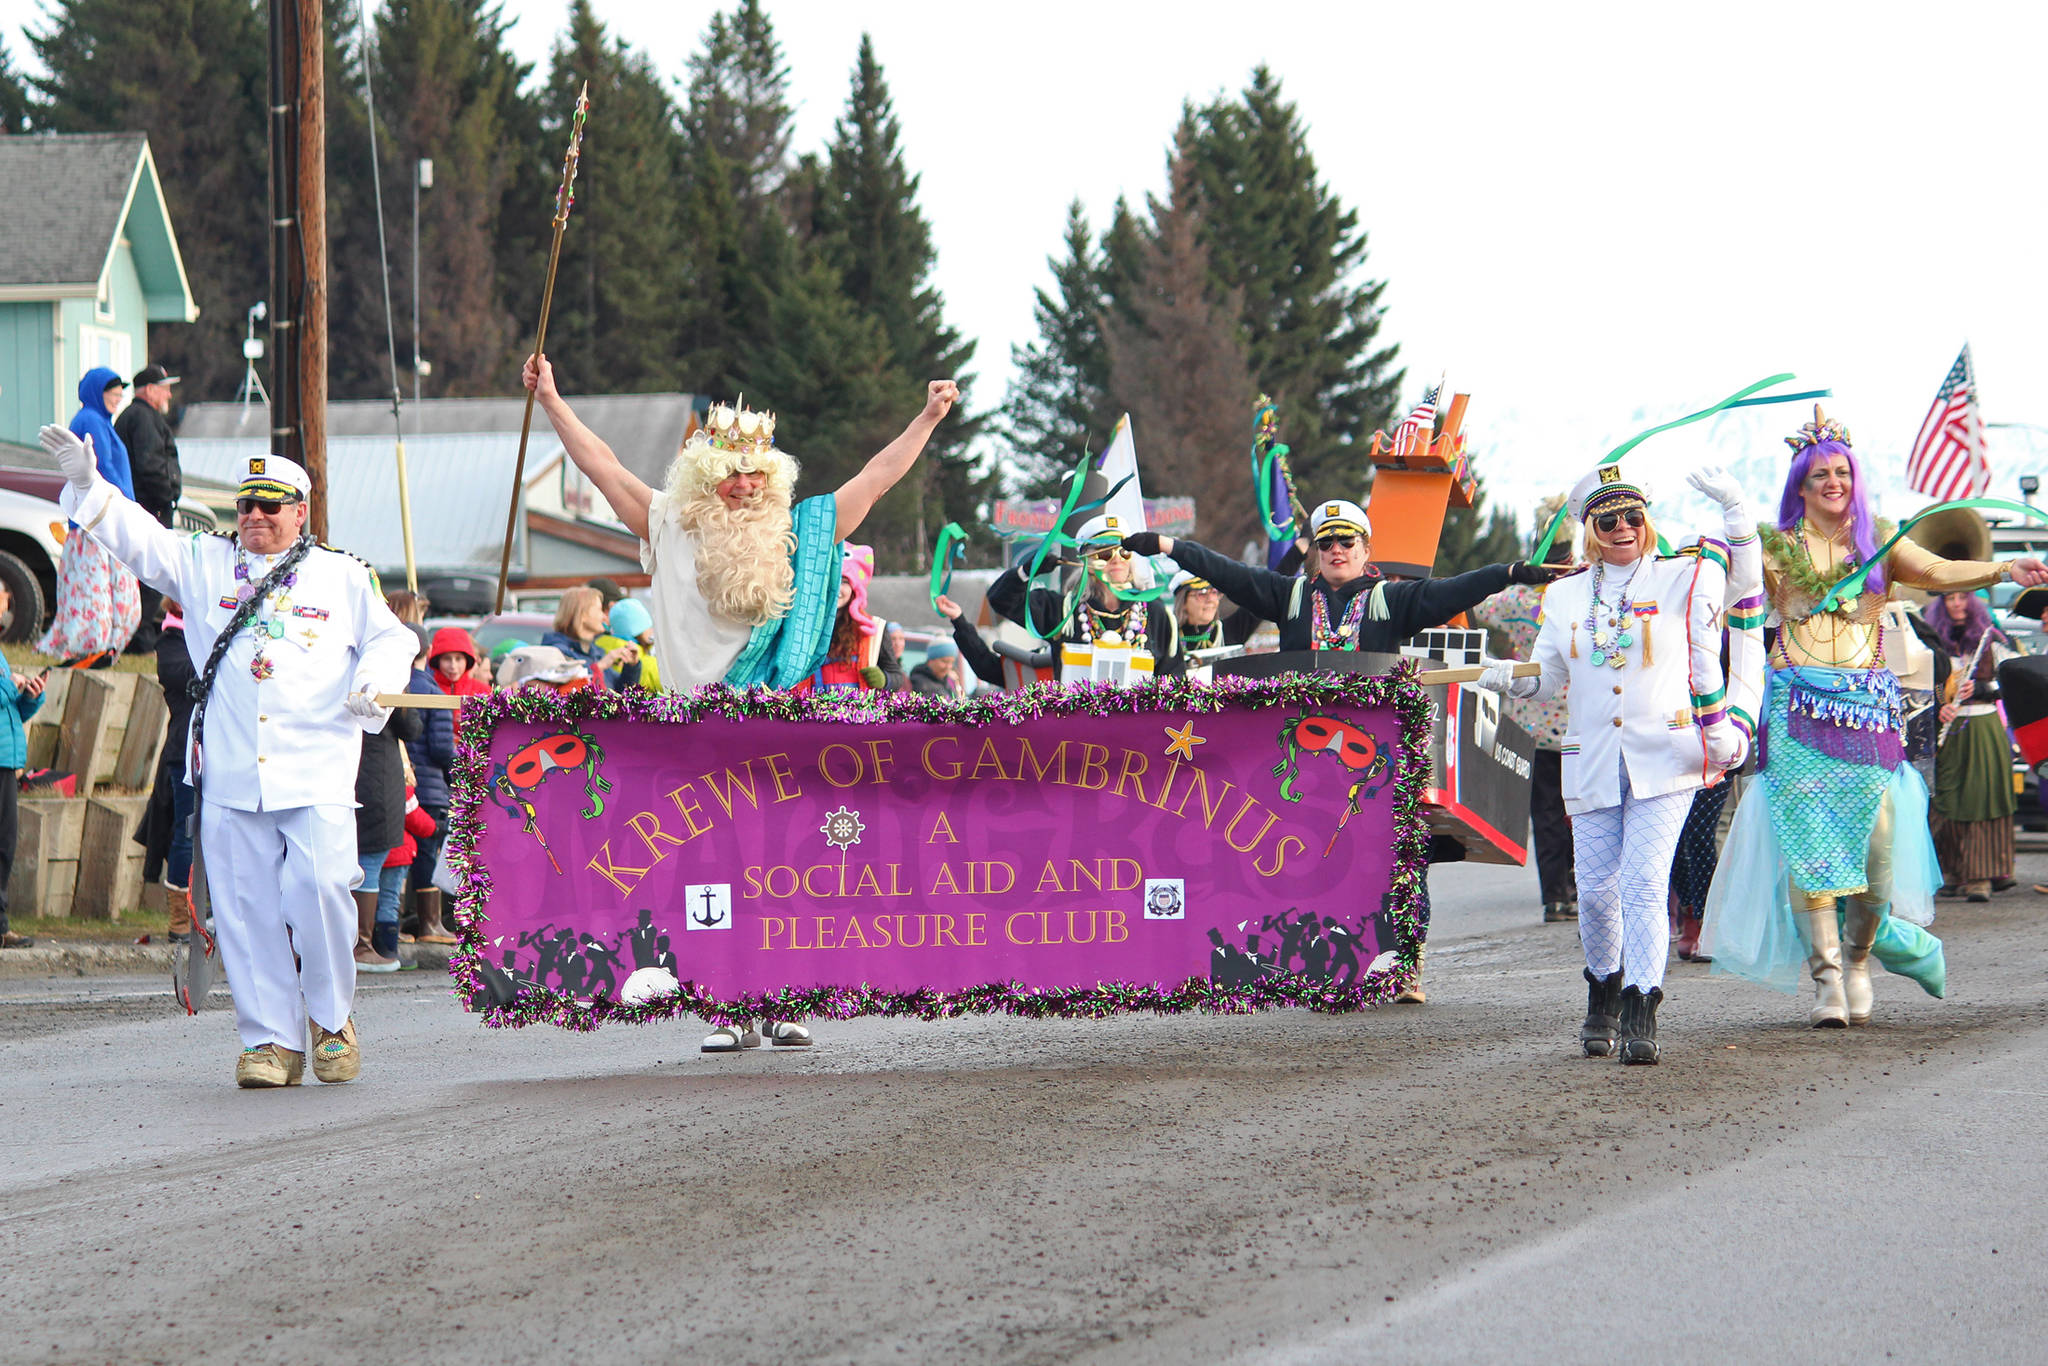 Photo by Megan Pacer/Homer News 
Members of the Krewe of Gambrinus march down Pioneer Avenue on Saturday, Feb. 9, 2019 during the Winter Carnival Parade in Homer, Alaska.